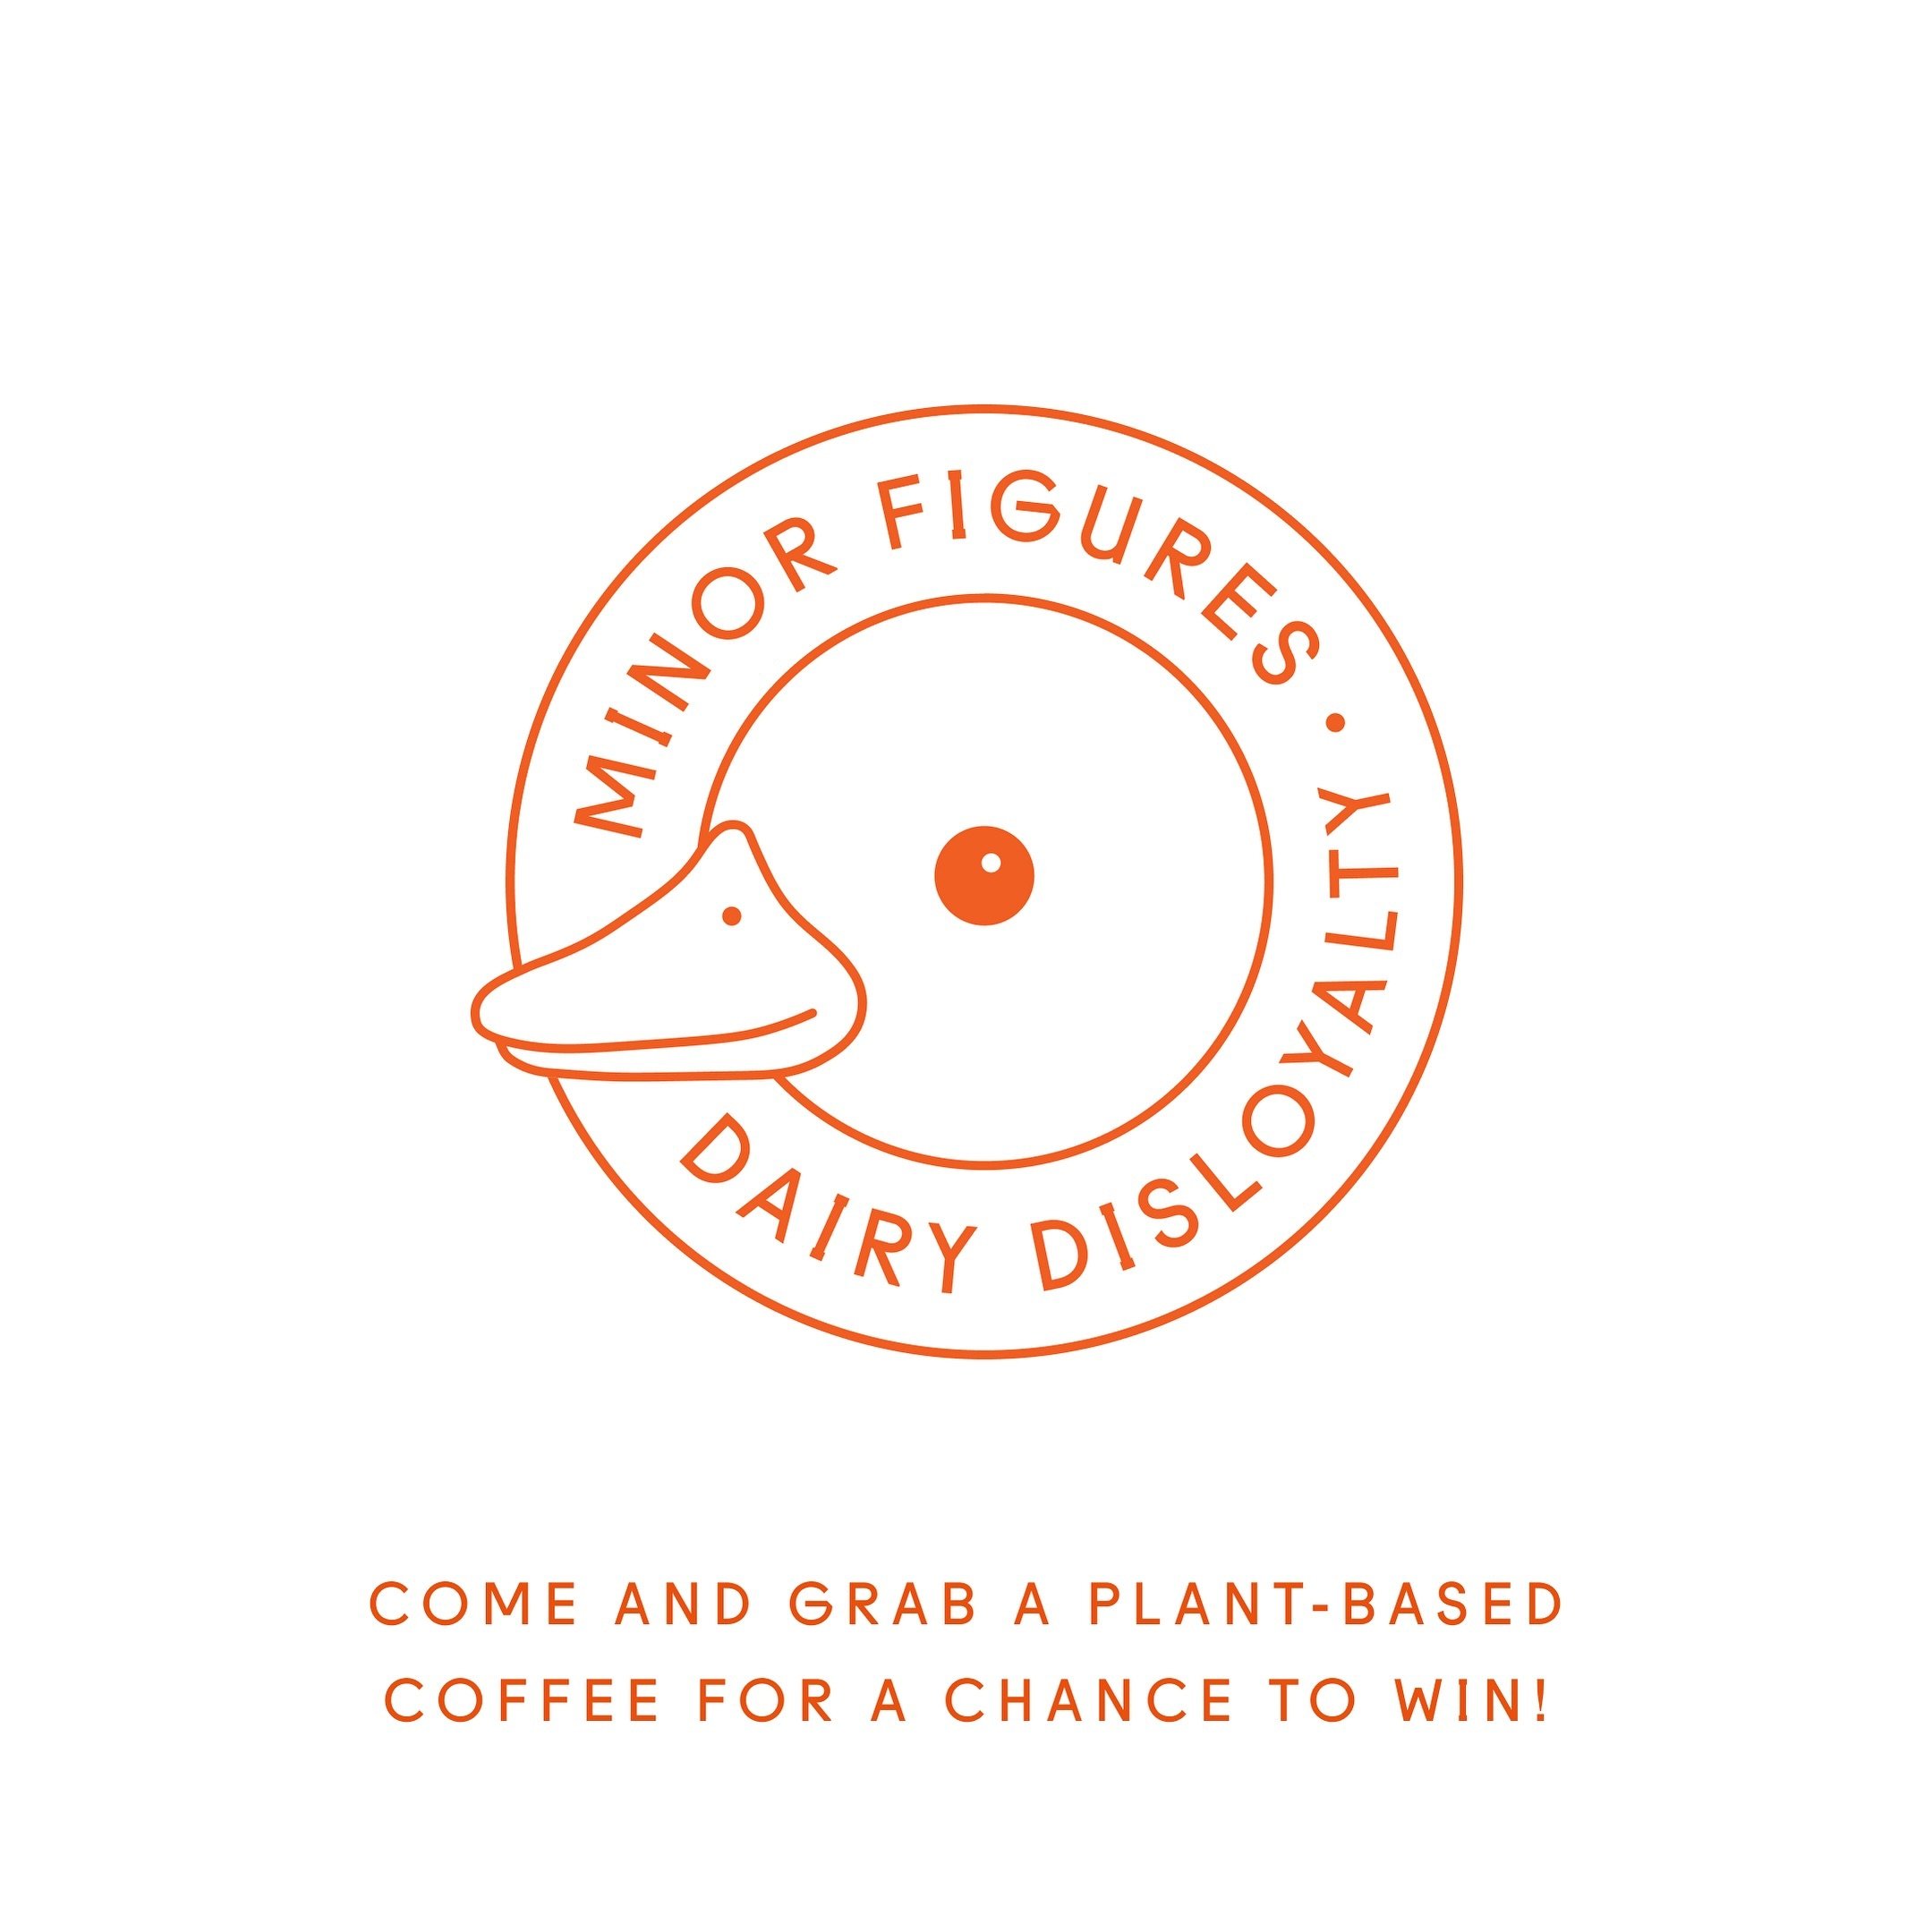 GAME ON! @minorfigures Dairy Disloyalty starts today.

Collect stamps from participating cafes and enter to win  a @lamarzoccohome espresso machine.

How do I play?

To collect the stamps on the disloyalty card, participants must buy a specialty dr